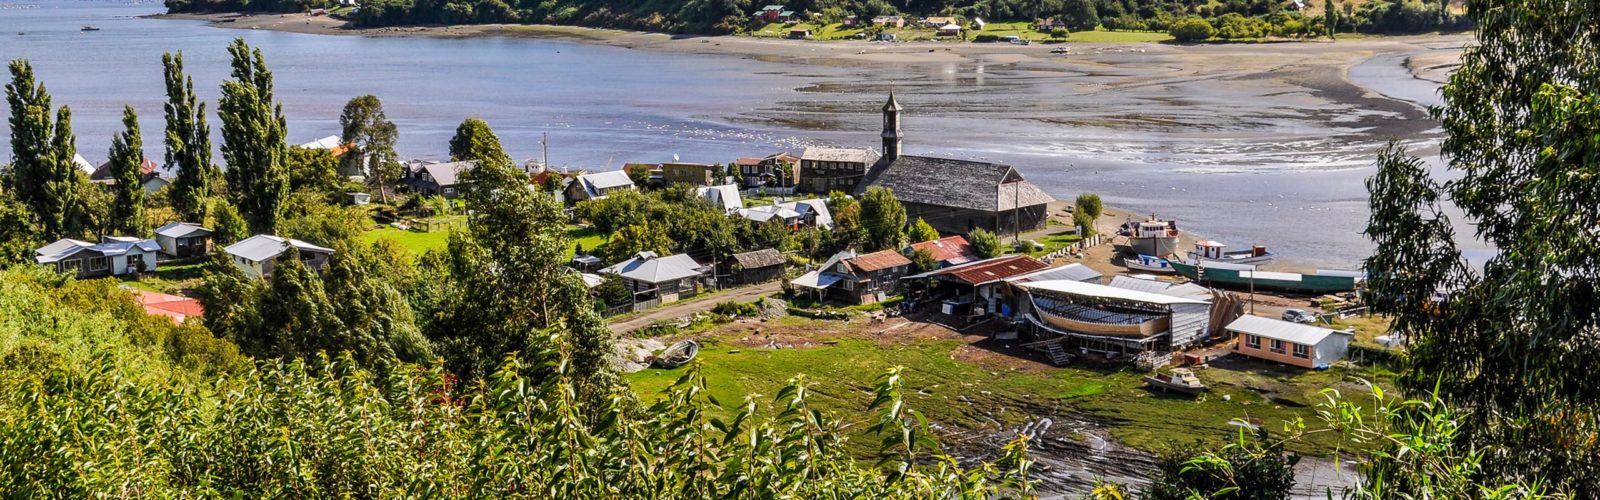 View of a small village, Chiloe Island, Patagonia, Chile